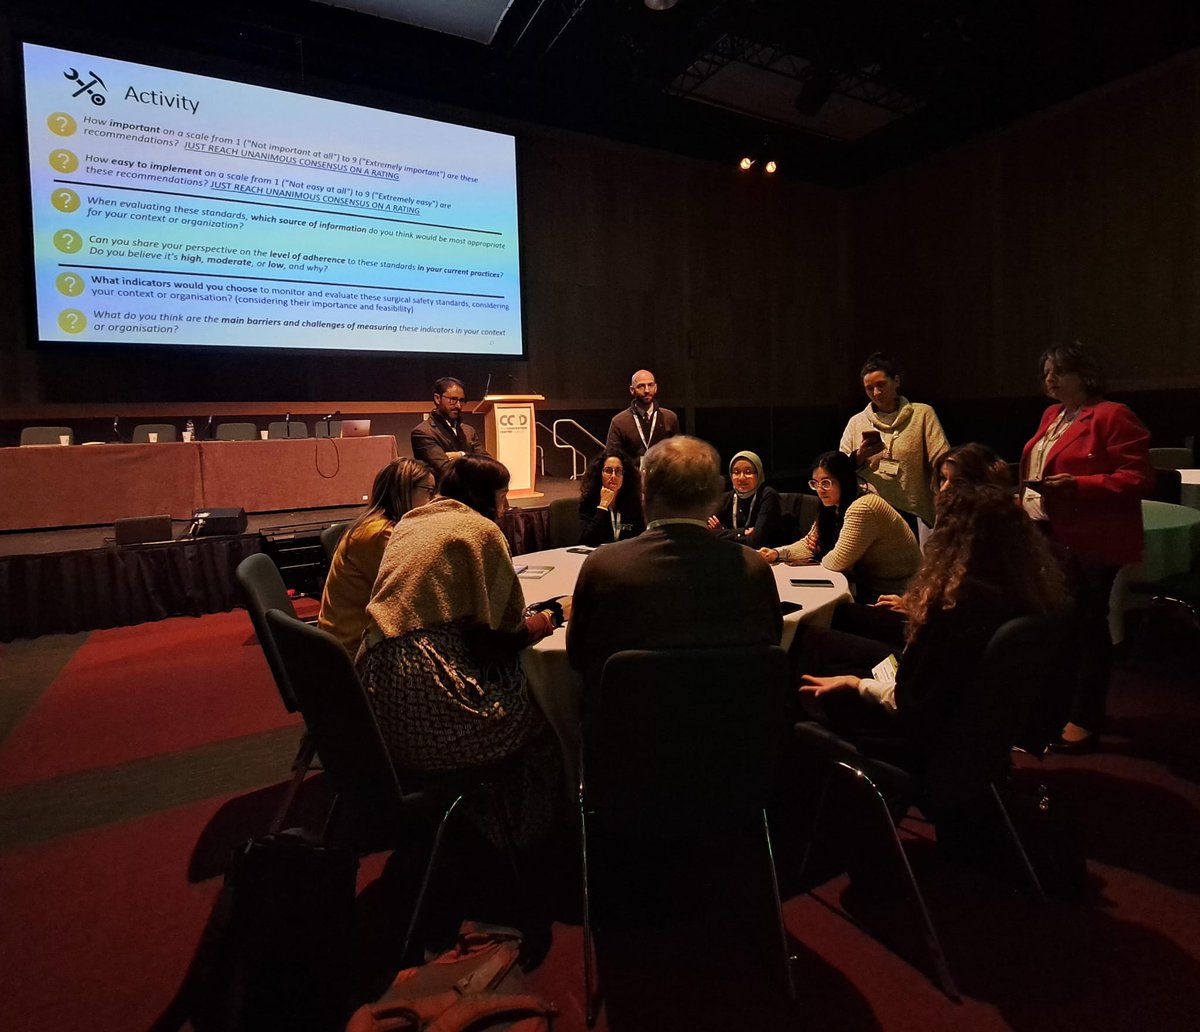 #SAFEST is well represented at #eph2023 in Dublin!
Partners from @ENSP_UNL, @Inst_Donabedian, @SENSARorg, held a workshop on quality assessment in perioperative care, which was co-chaired by @mpapadakaki from @EuphaInjury & @pjsousa2007. Thank you for the fruitful discussions!